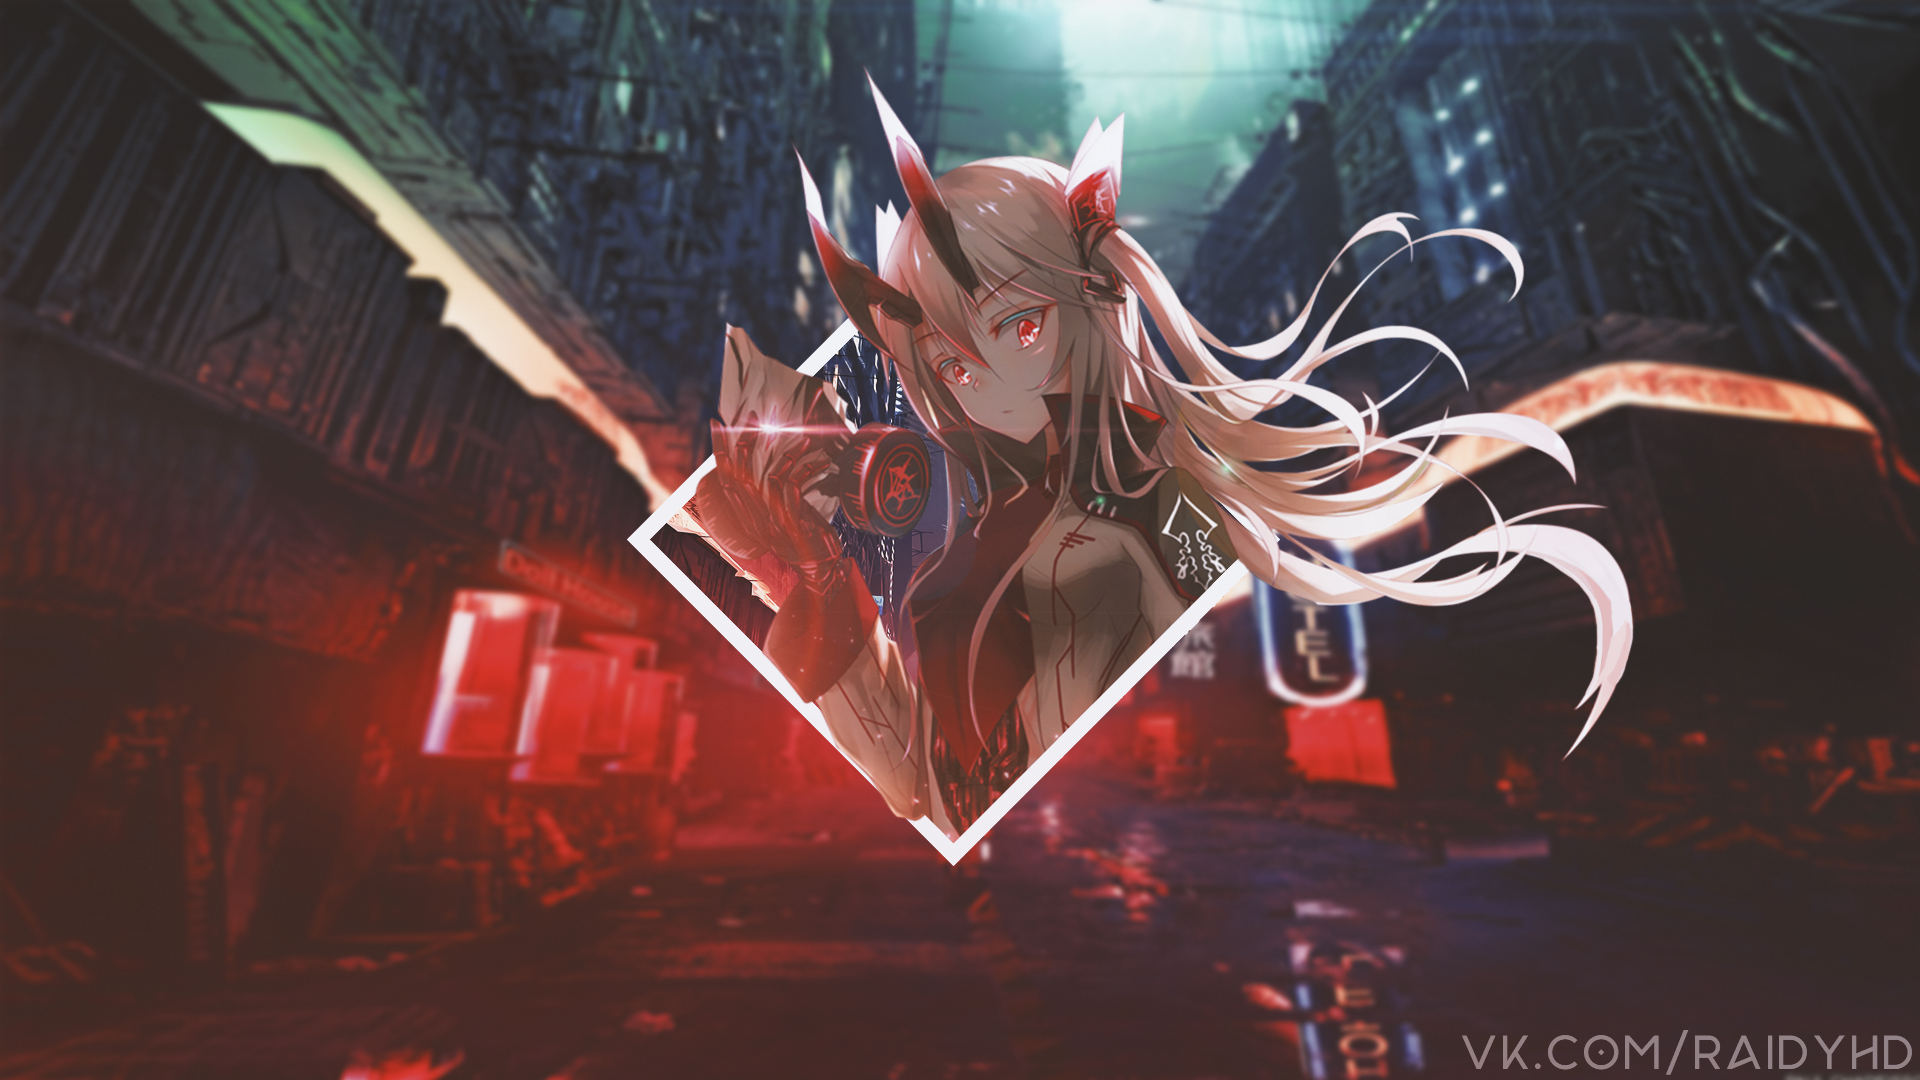 Anime 1920x1080 anime anime girls picture-in-picture neon red